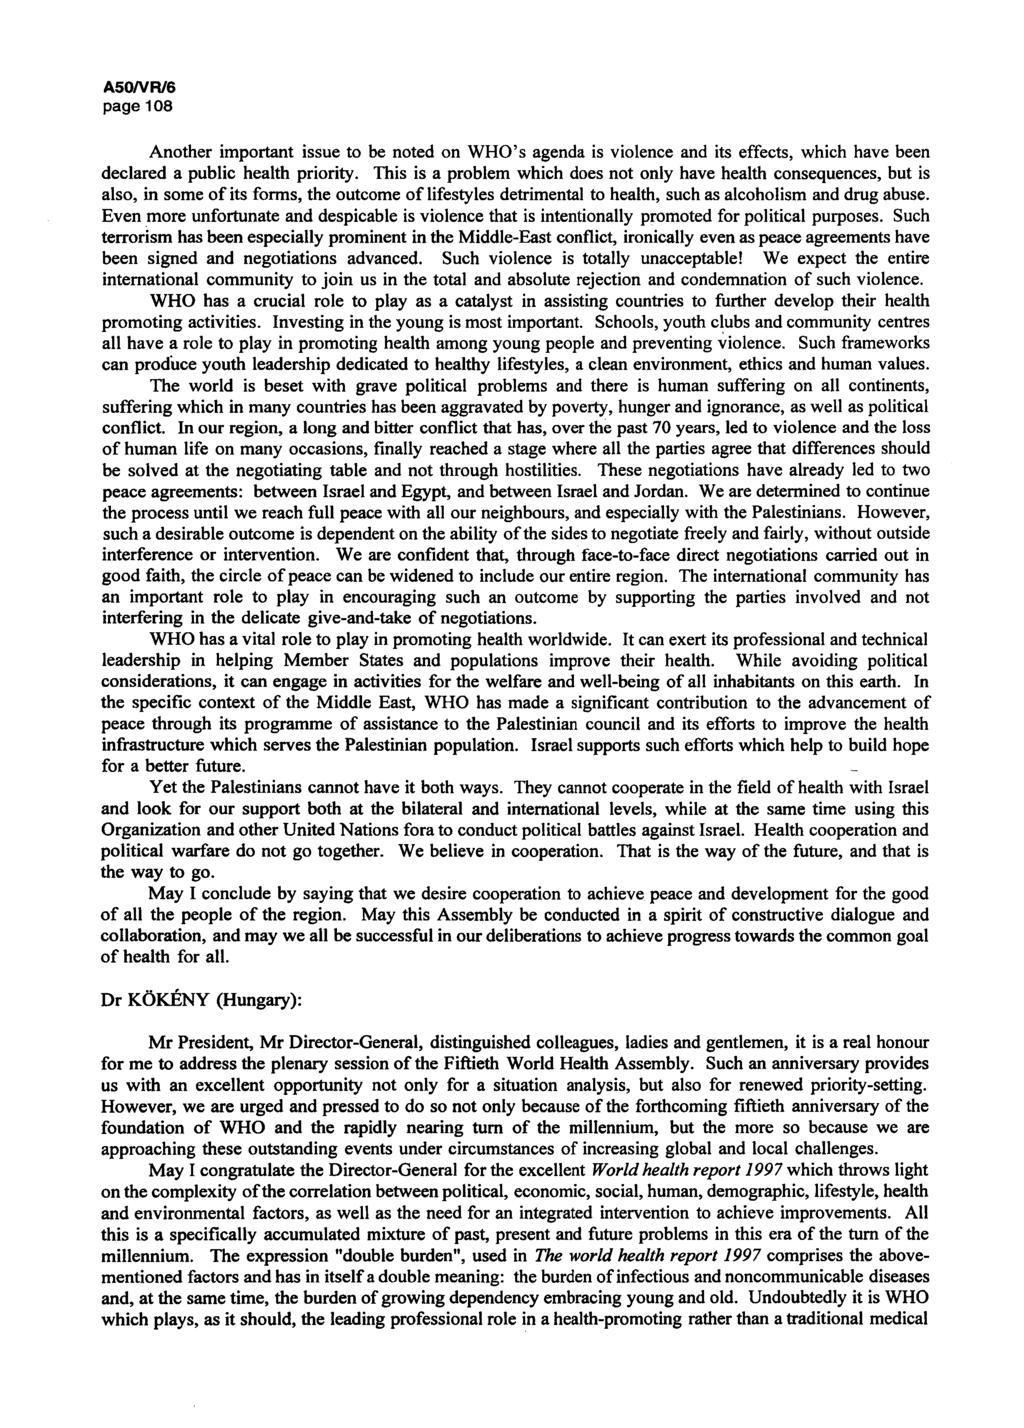 A50/VR/5 page 108 Another important issue to be noted on WHO's agenda is violence and its effects, which have been declared a public health priority.